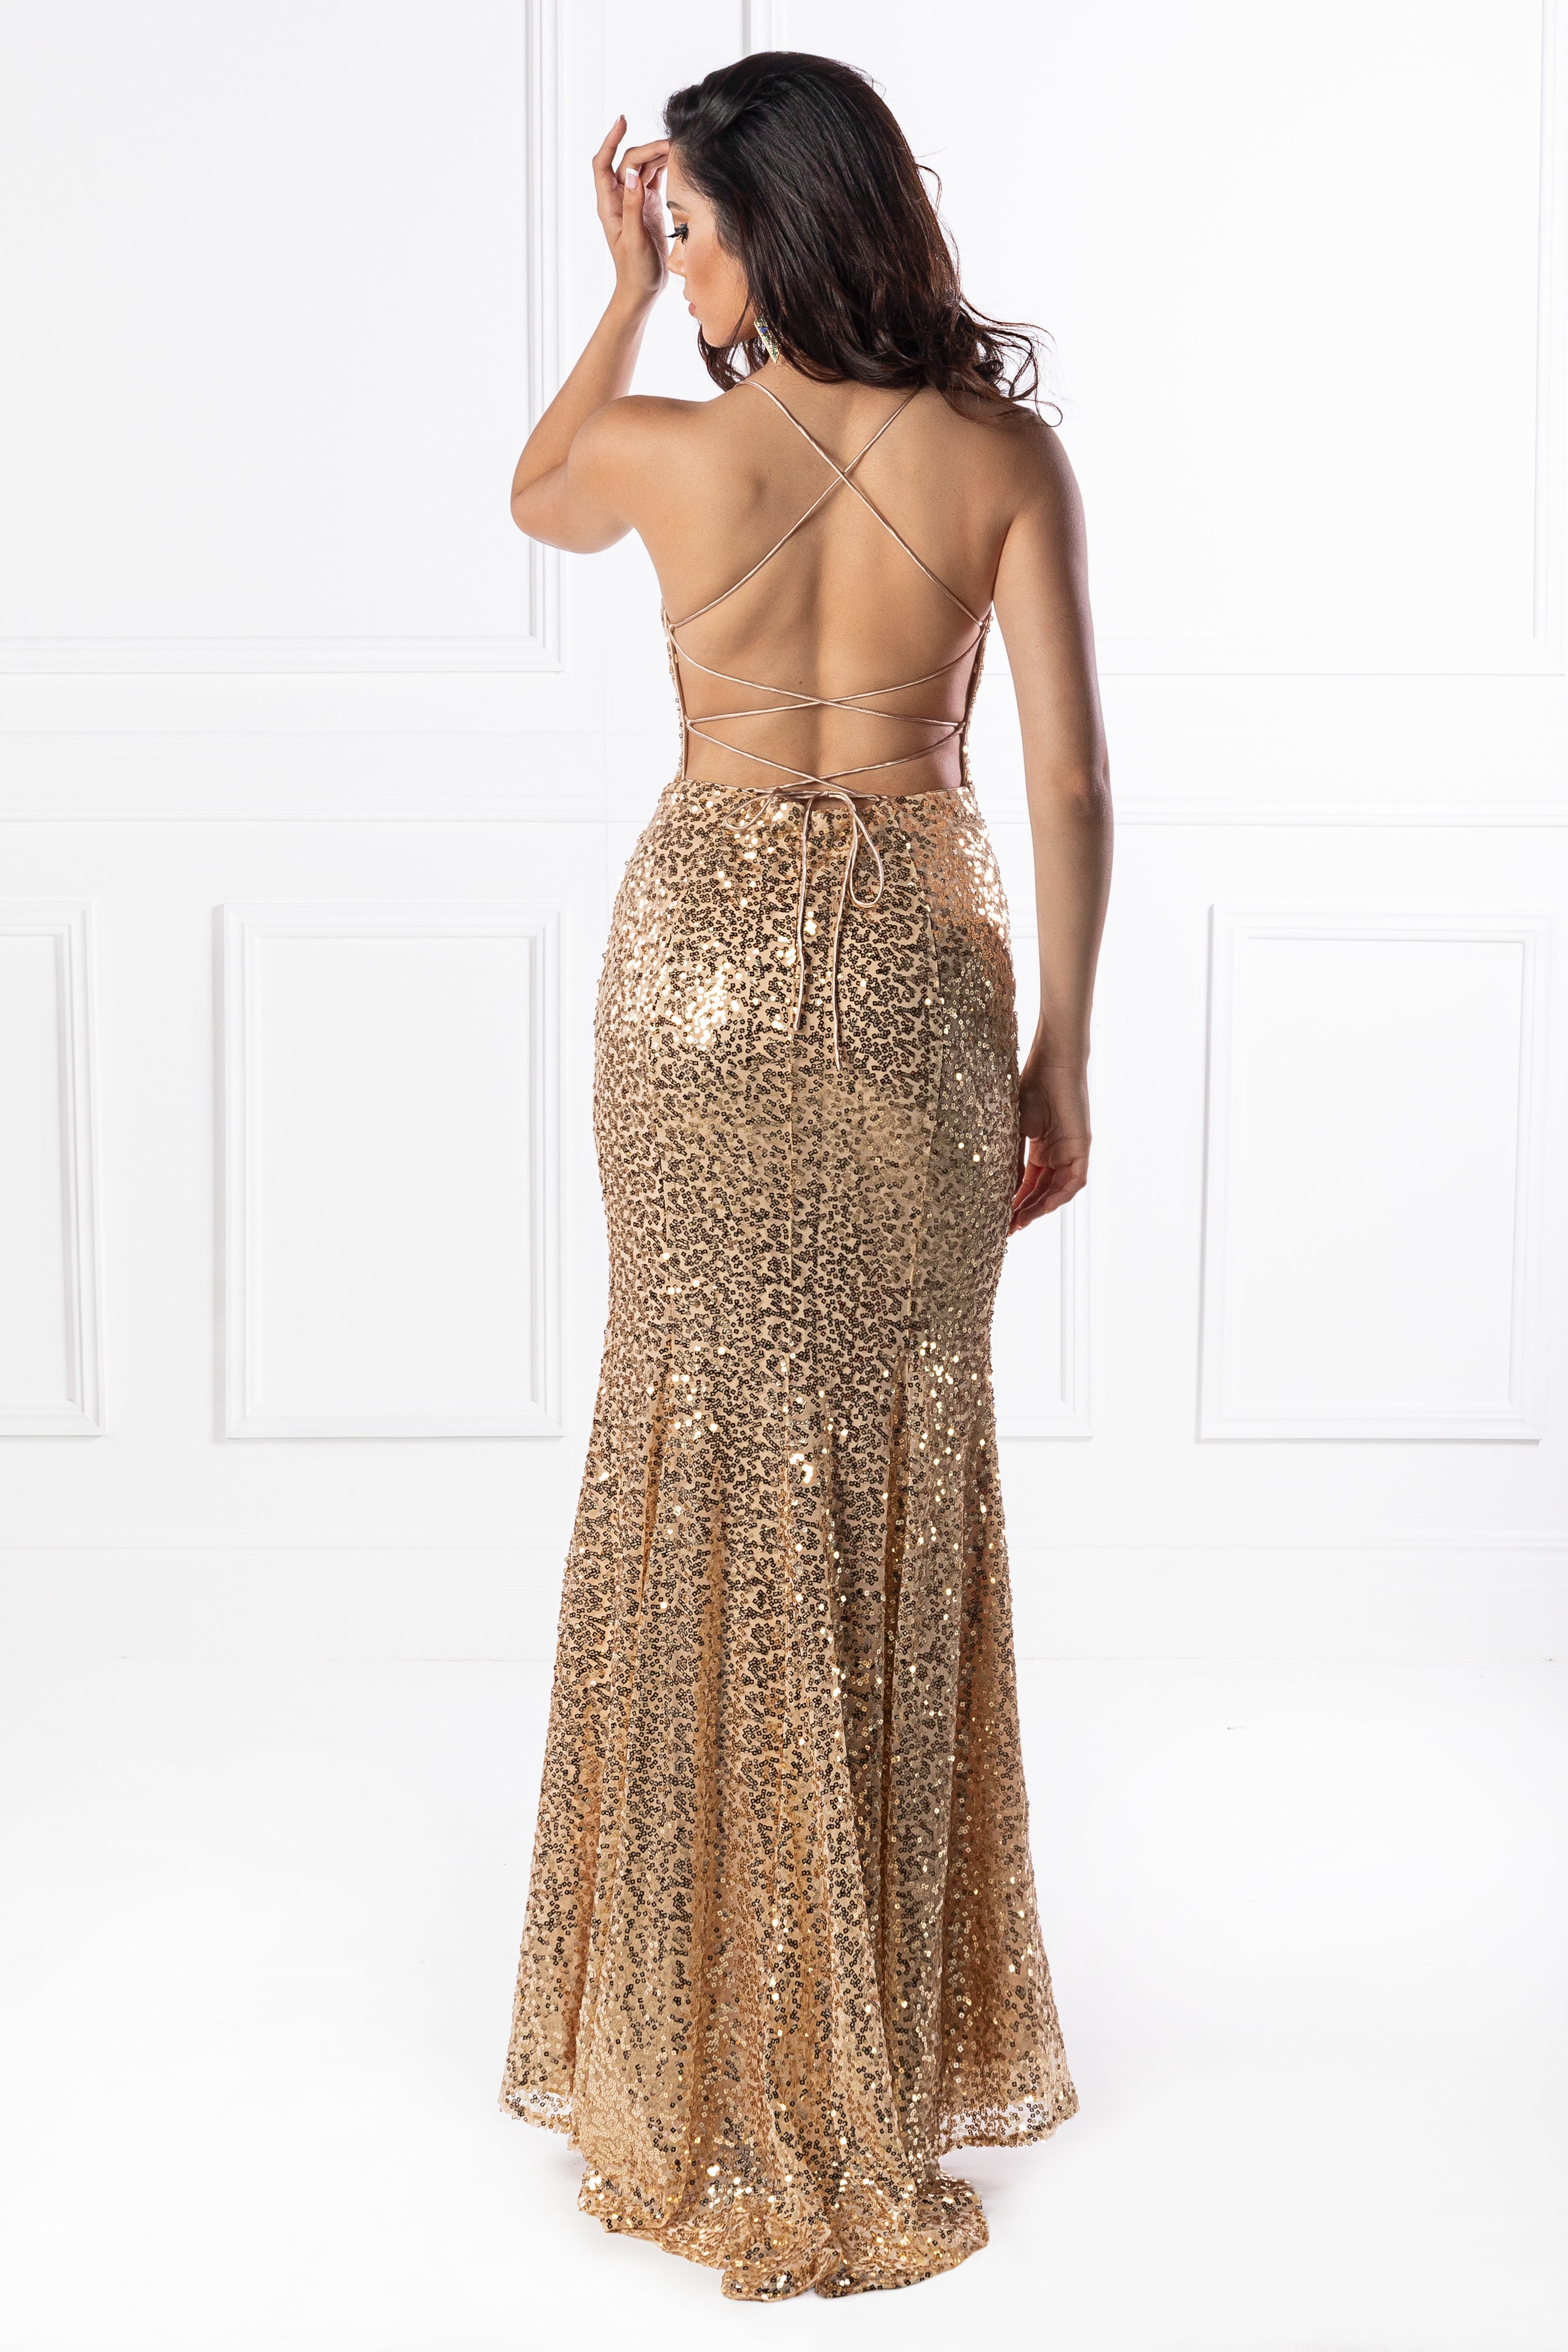 The NIKEETA Gold Sequin Corset Back Mermaid Formal Gown {vendor} AfterPay Humm ZipPay LayBuy Sezzle